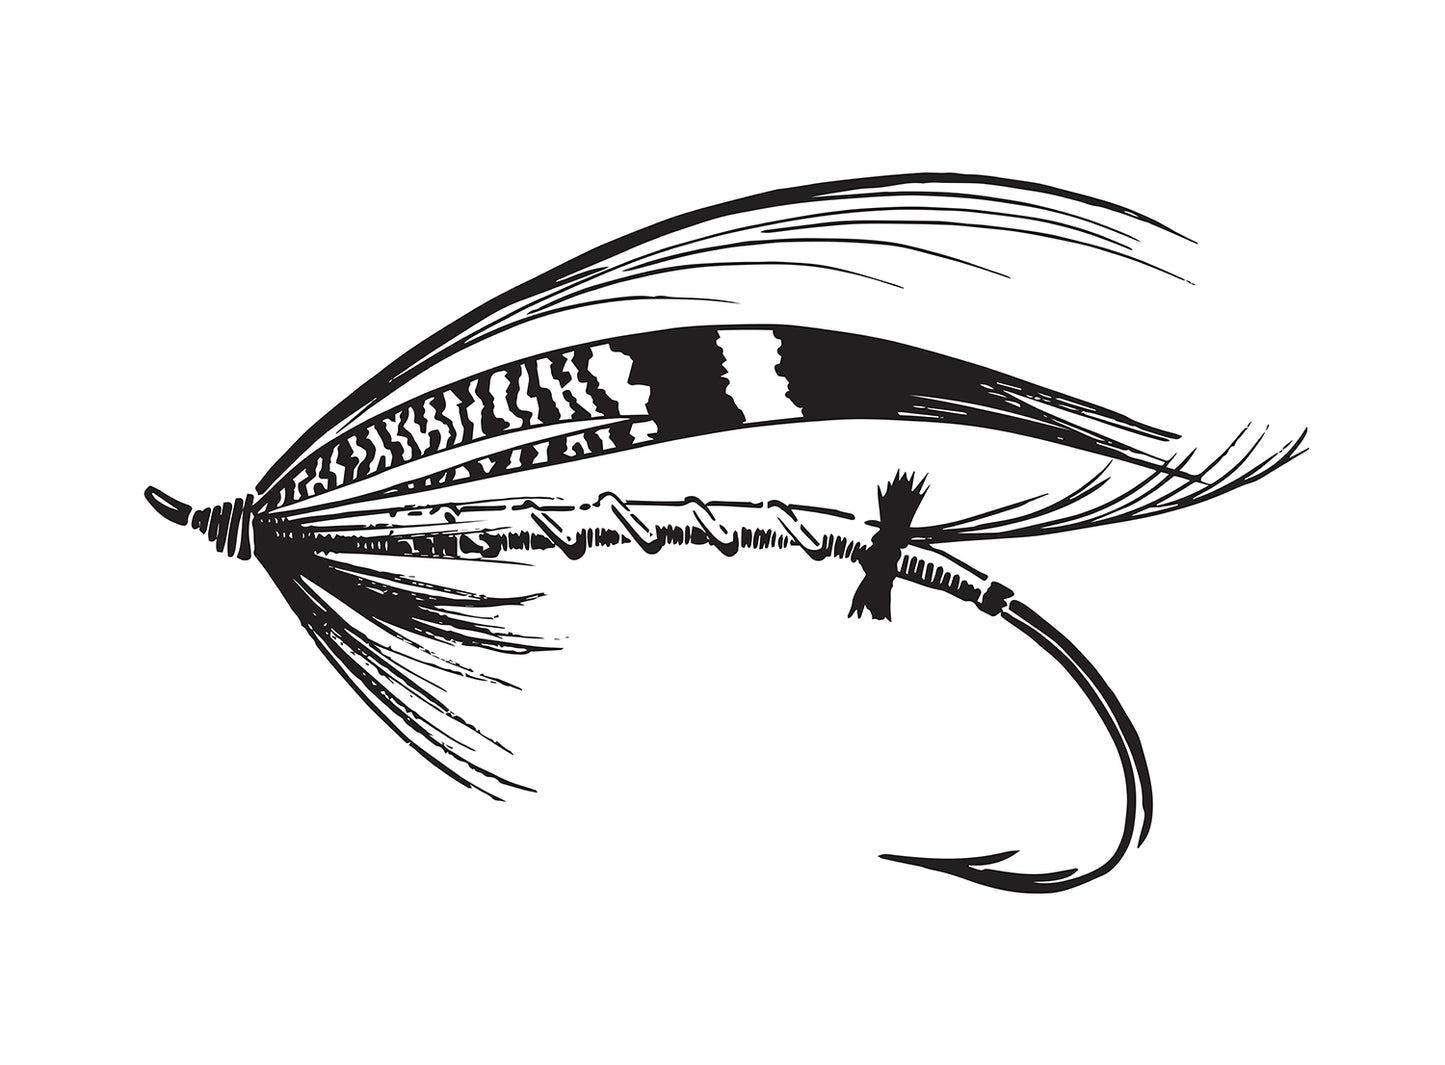 A black and white drawing of a traditional salmon fly